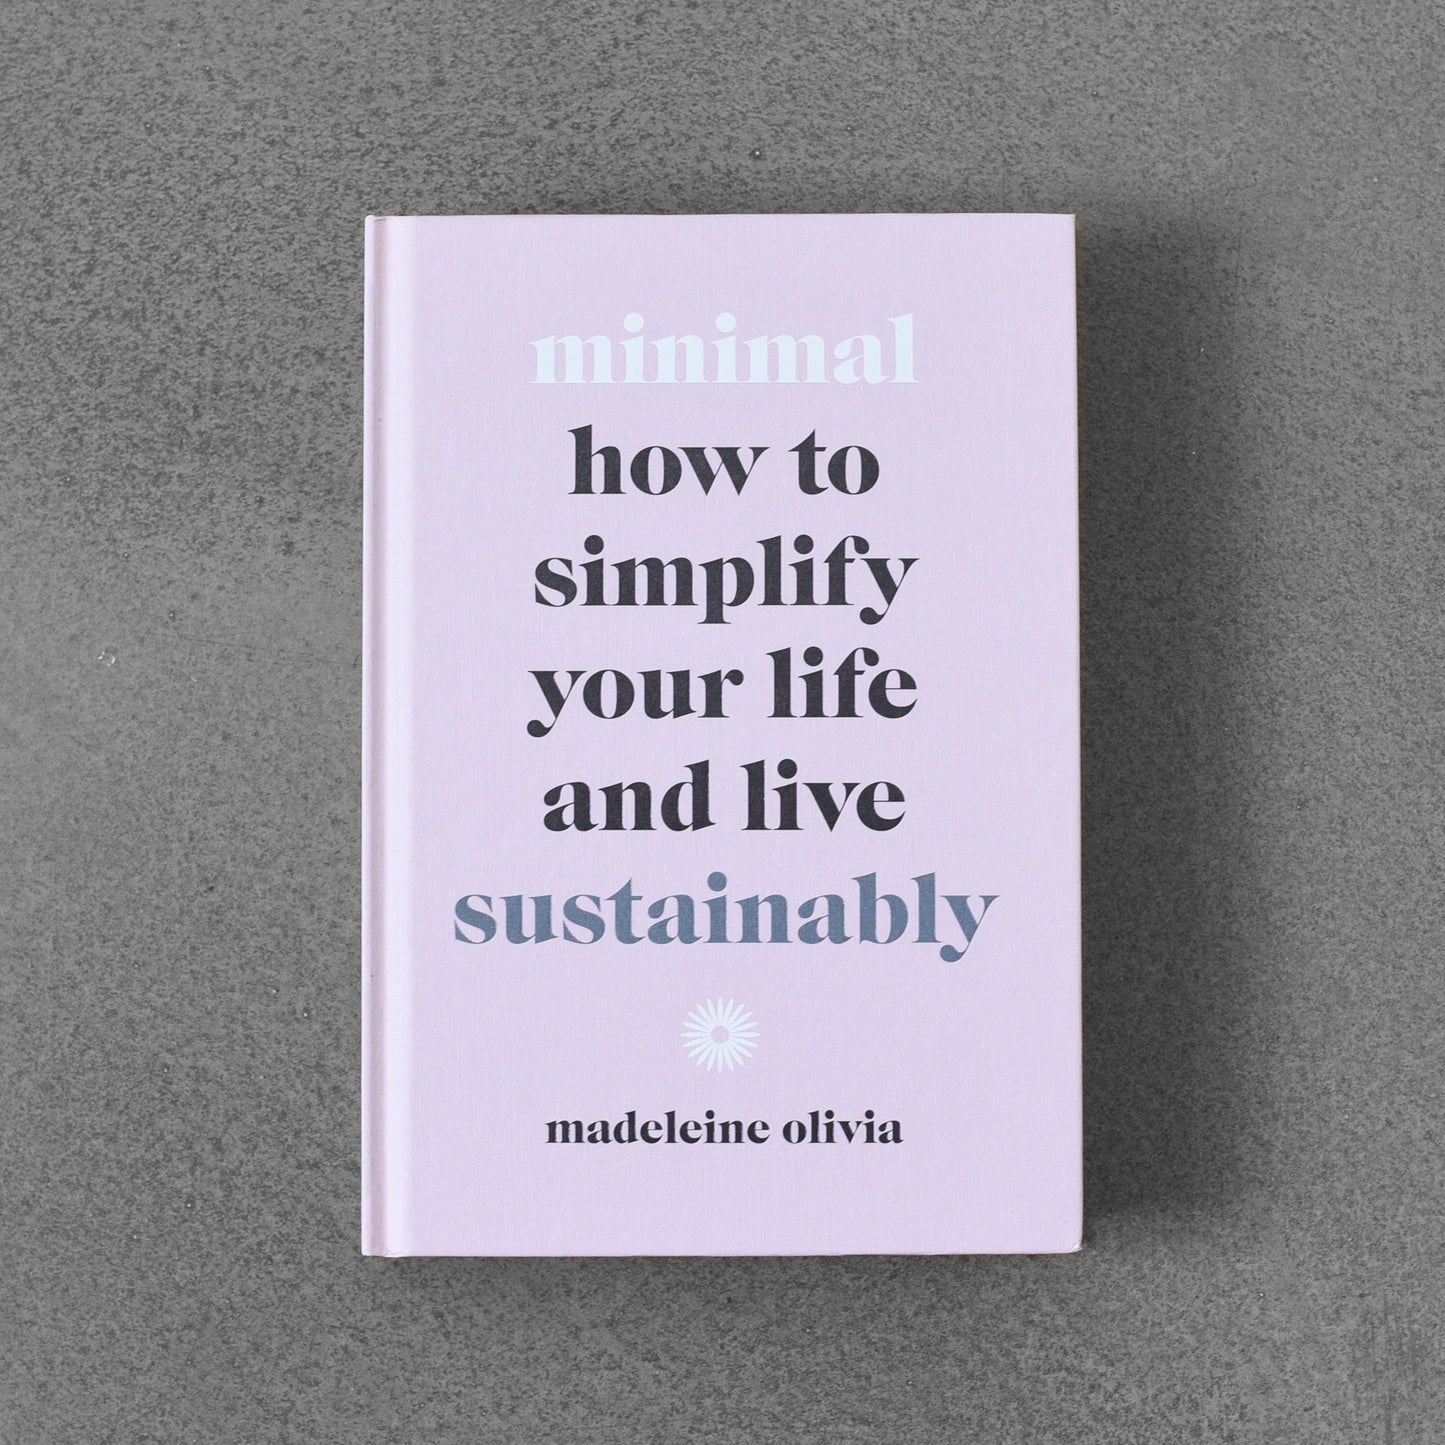 minimal: how to simplify your life and live sustainably - madeleine oliva